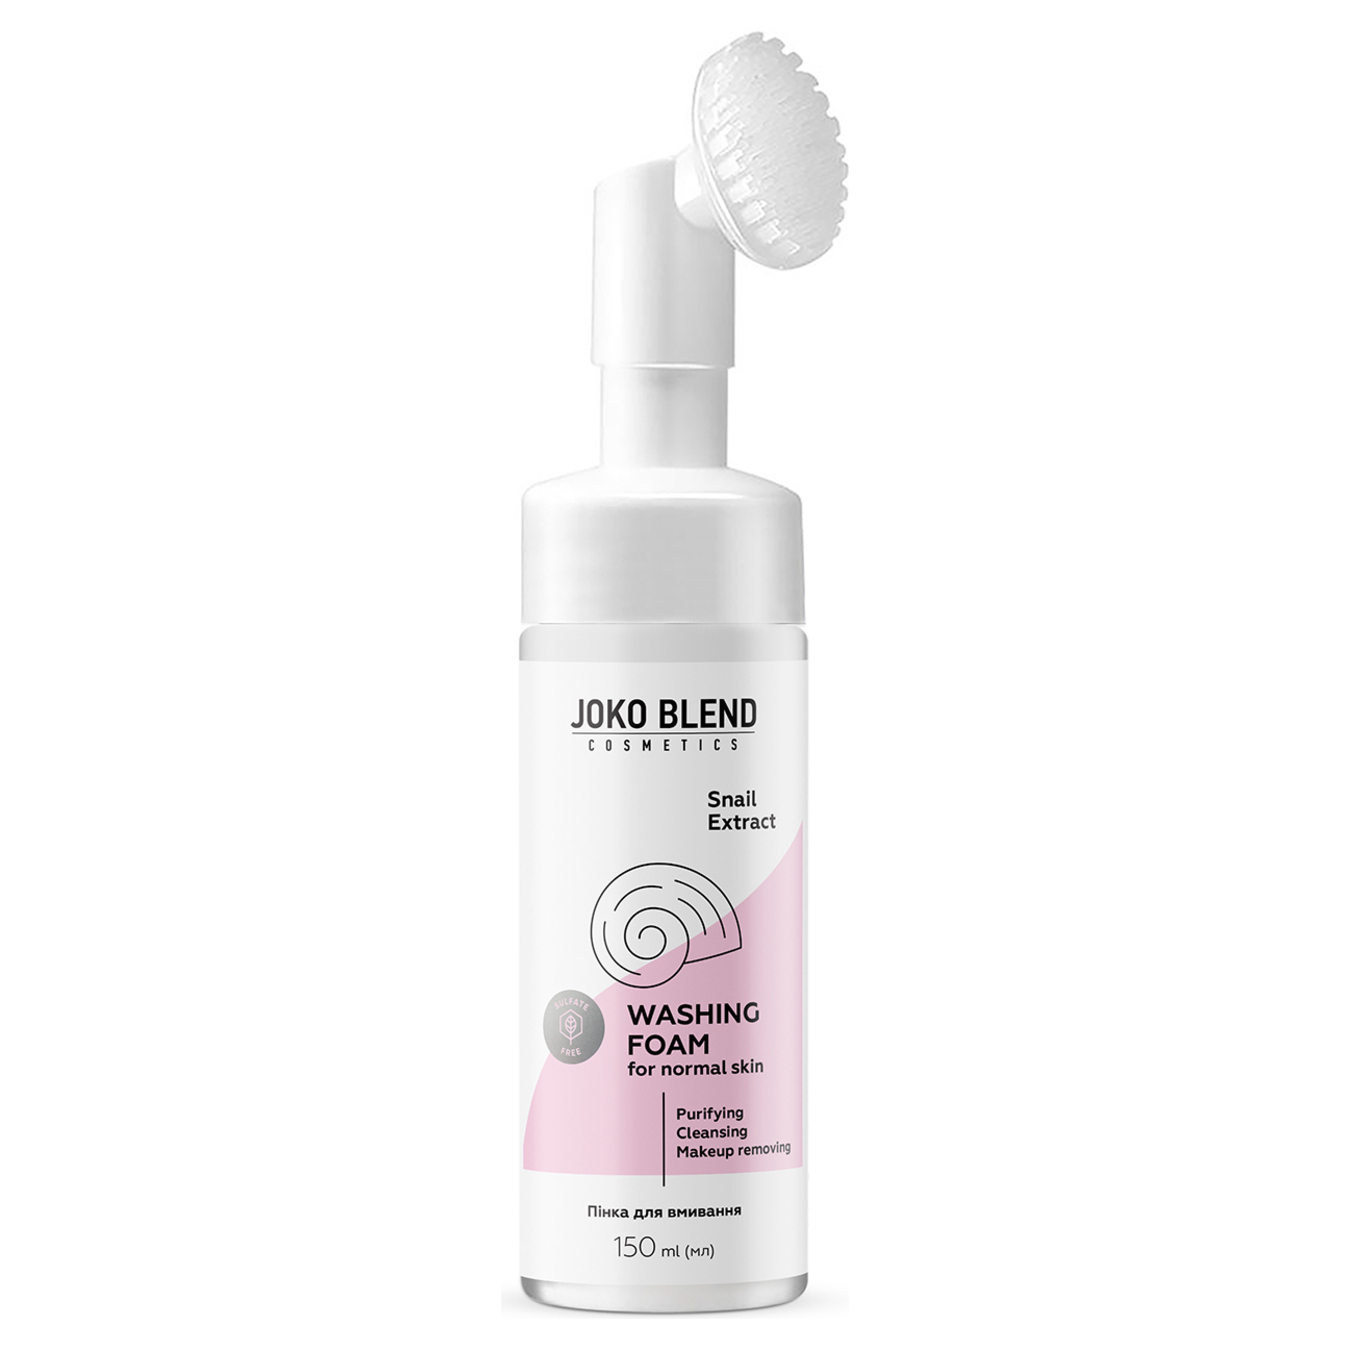 Joko Blend foam for washing with snail extract for normal skin 150ml